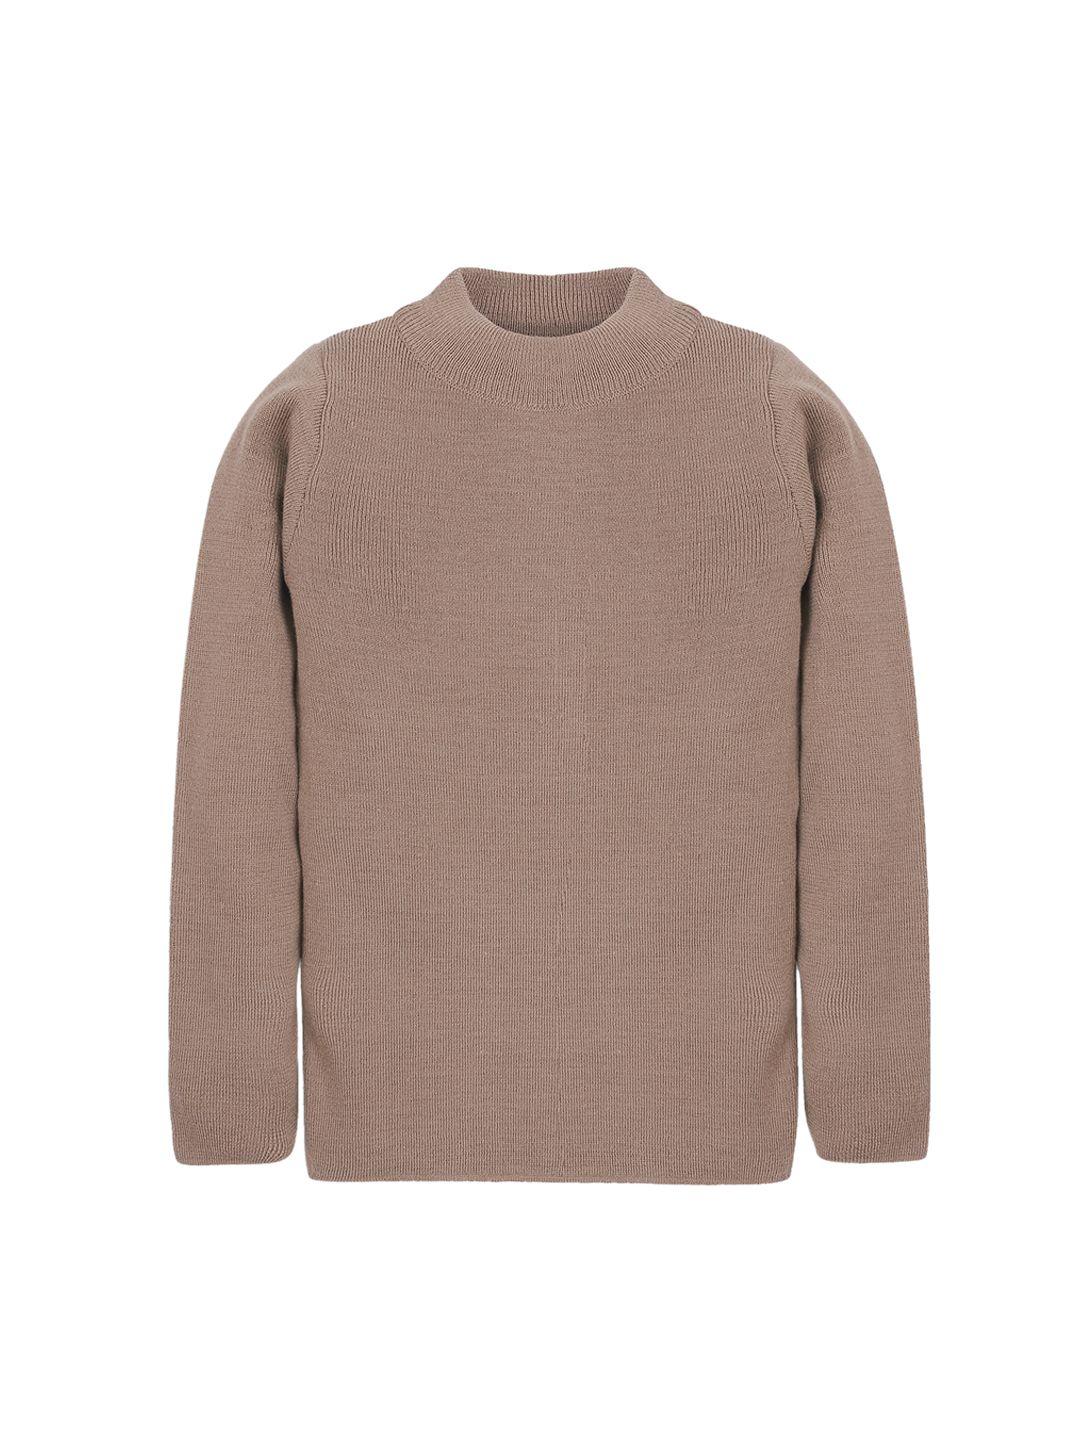 rvk unisex camel brown solid pullover skivvy sweater